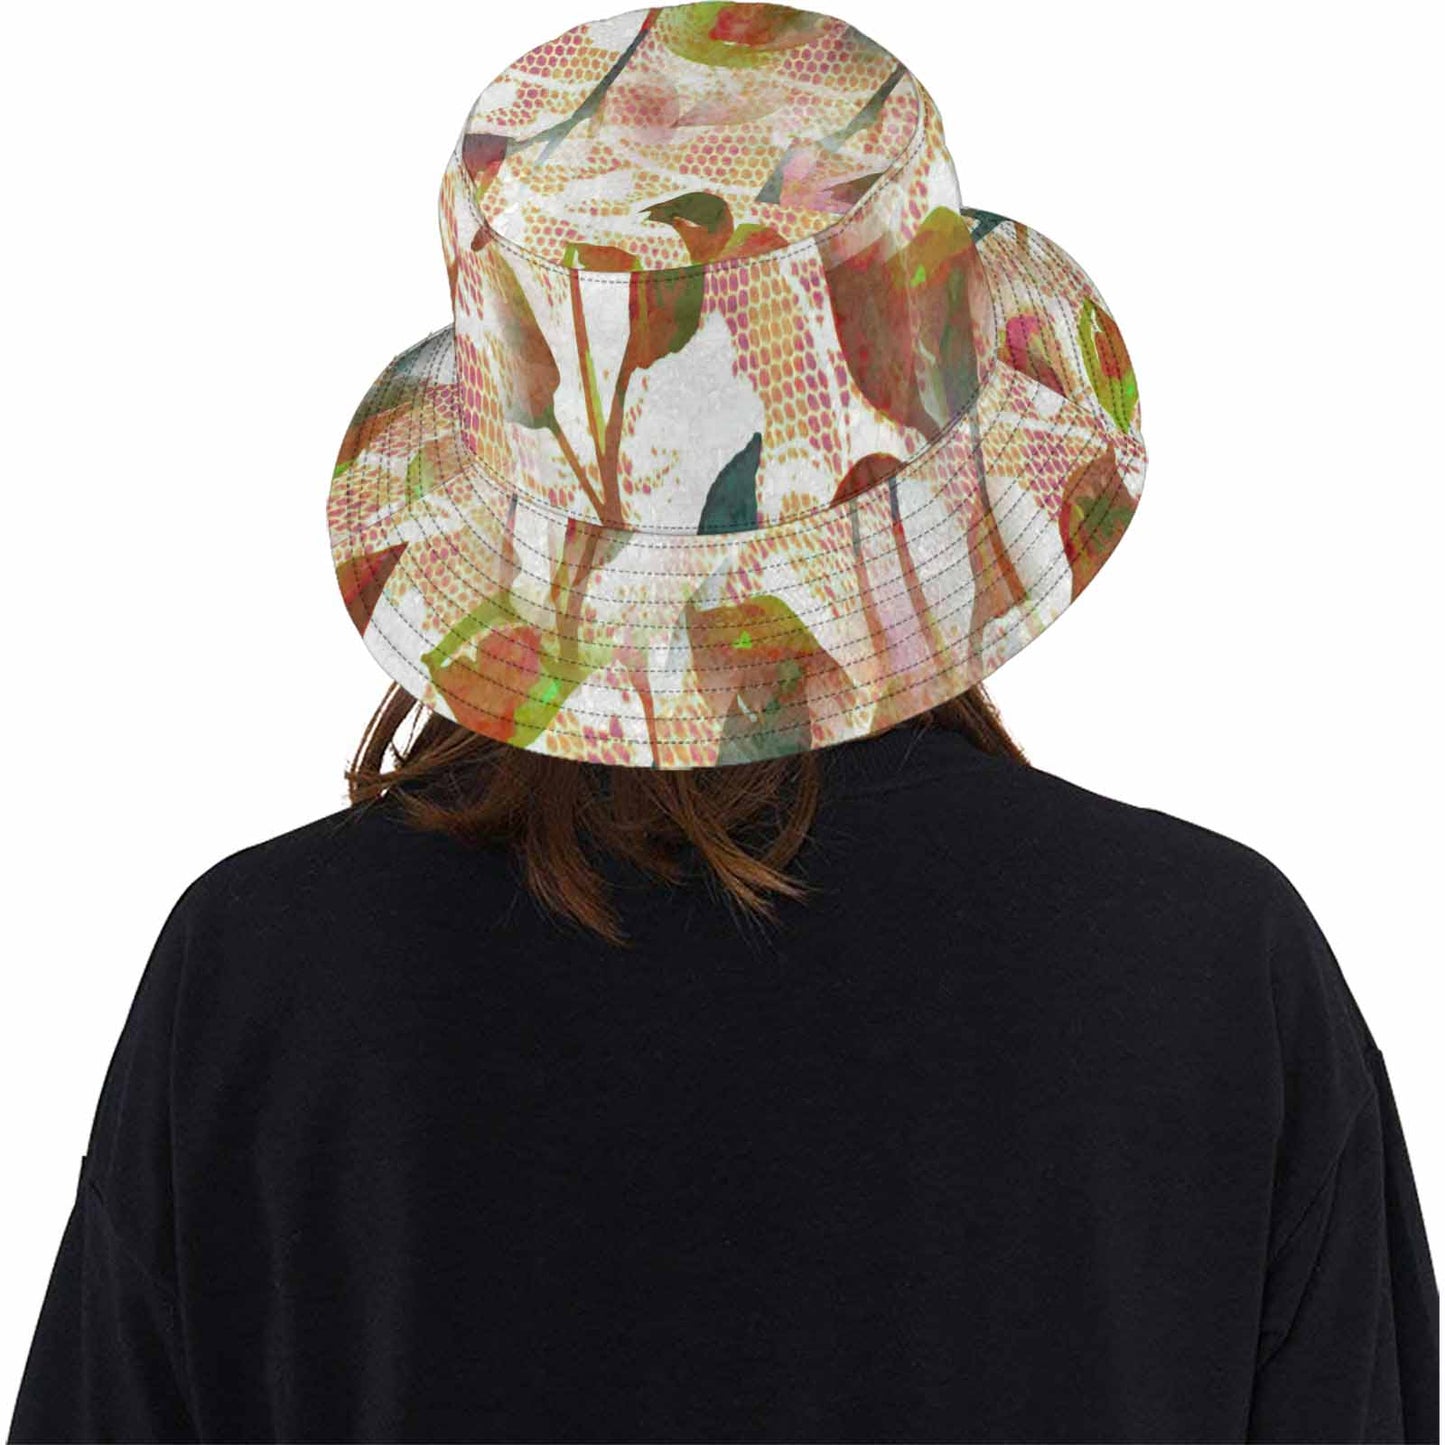 Victorian lace Bucket Hat, outdoors hat, design 52